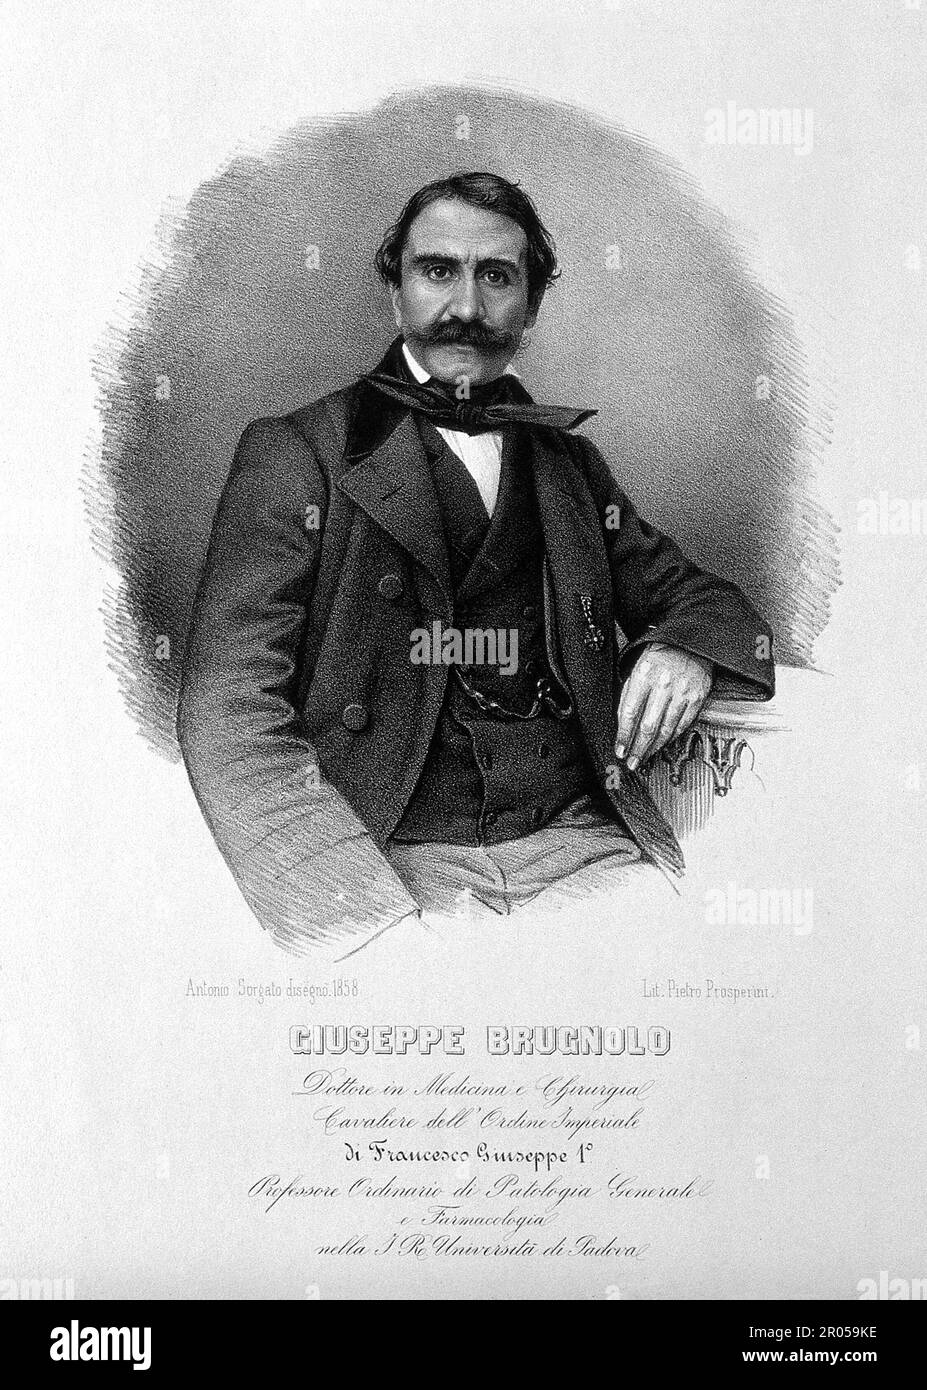 1858 ca , Padova ,  ITALY : The celebrated Italian veterinarian , pharmacist and physician GIUSEPPE BRUGNOLO ( born in San Daniele del Friuli 4 december 1804 - Padova 15 november 1876 ). Became the personal physician of  the Kaiser Franz Joseph I ABSBURG of Austria , also was a professor at Padua University . Engraving from a 1858 portrait by Antonio Sorgato ( 1801 - 1875 ), lithographed by Pietro Prosperini - HISTORY - FOTO STORICHE - PATOLOGO - PATOLOGIA - VETERINARIO - VETERINARIA - VETERINARIAN - JOSEF - VETERINARY - FARMACIA - PHARMACY - Università di Padova - pathology  - foto storiche - Stock Photo